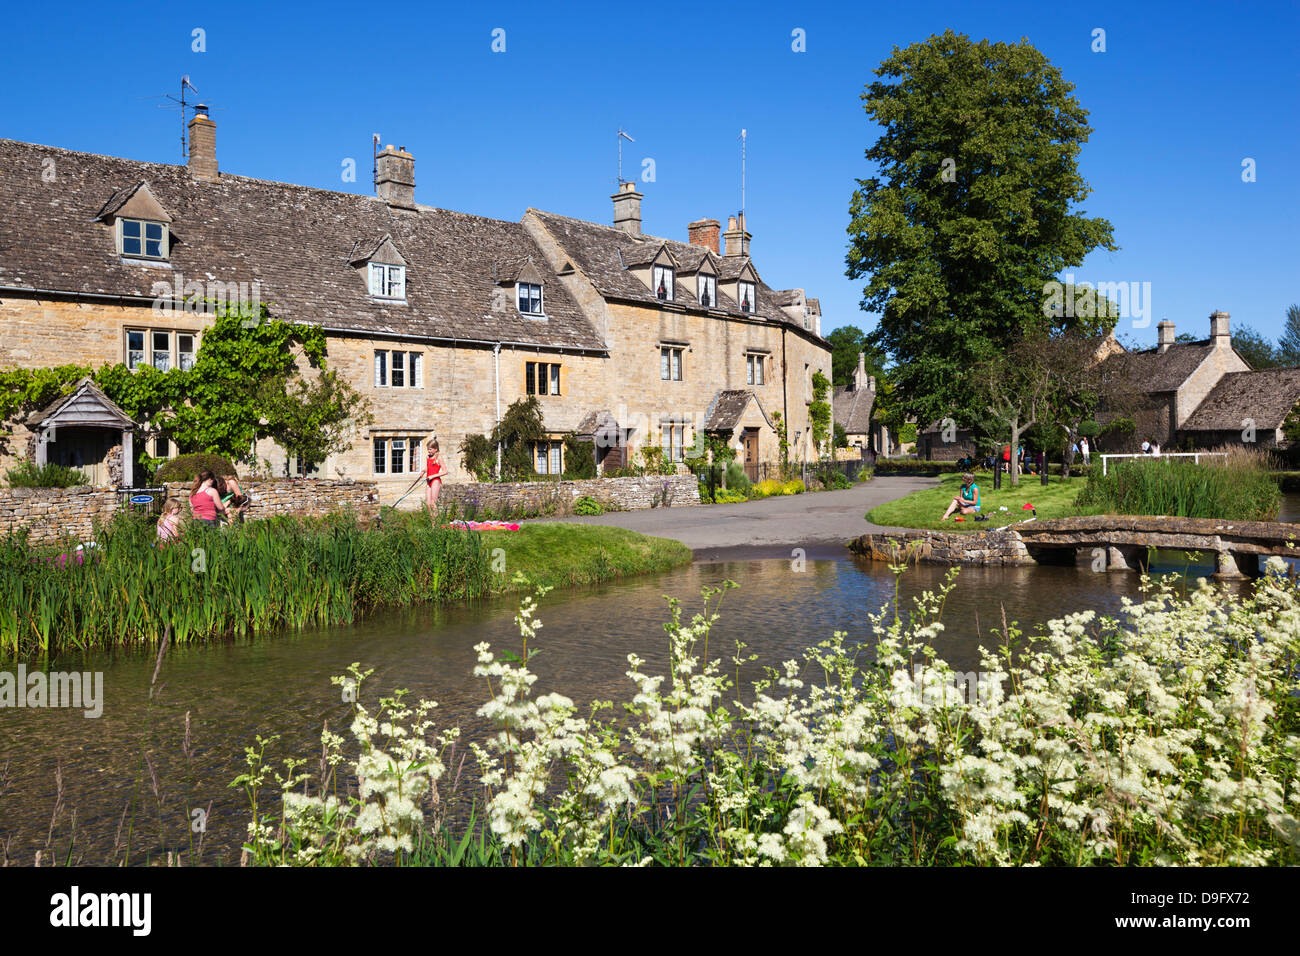 Cotswold cottage sul fiume occhio, Lower Slaughter, Gloucestershire, Cotswolds, England, Regno Unito Foto Stock